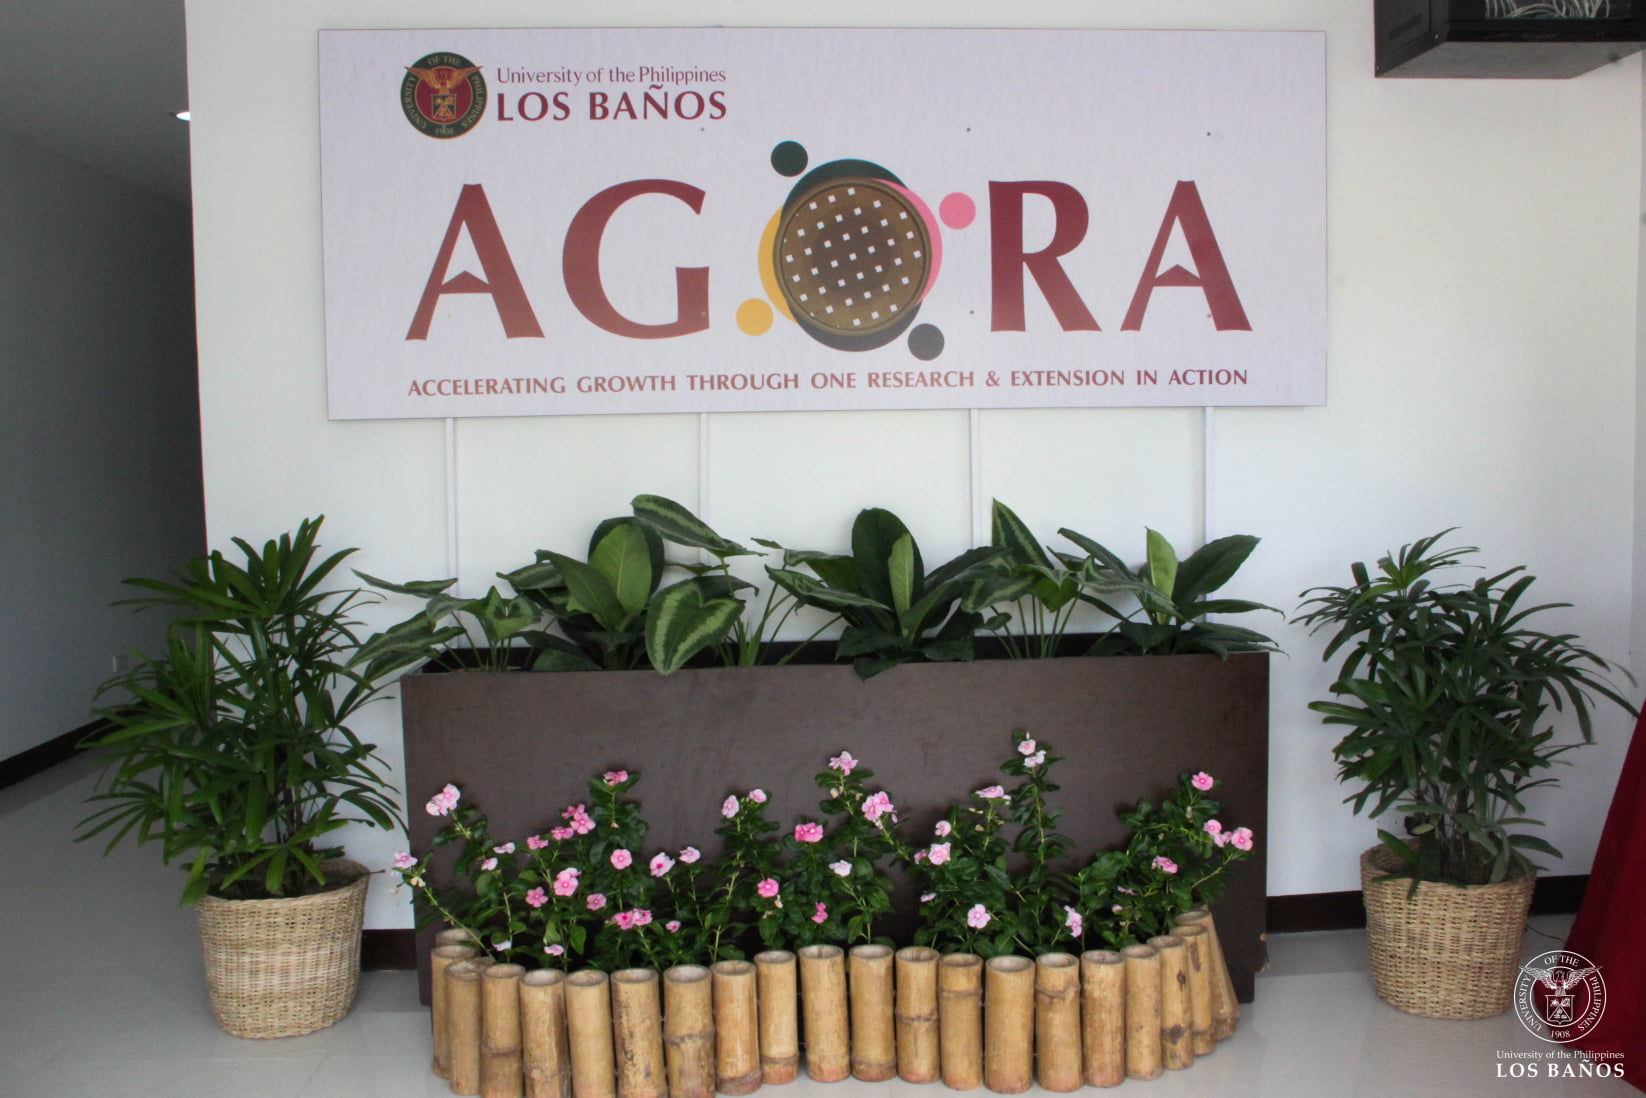 Soft launching of the UPLB AGORA